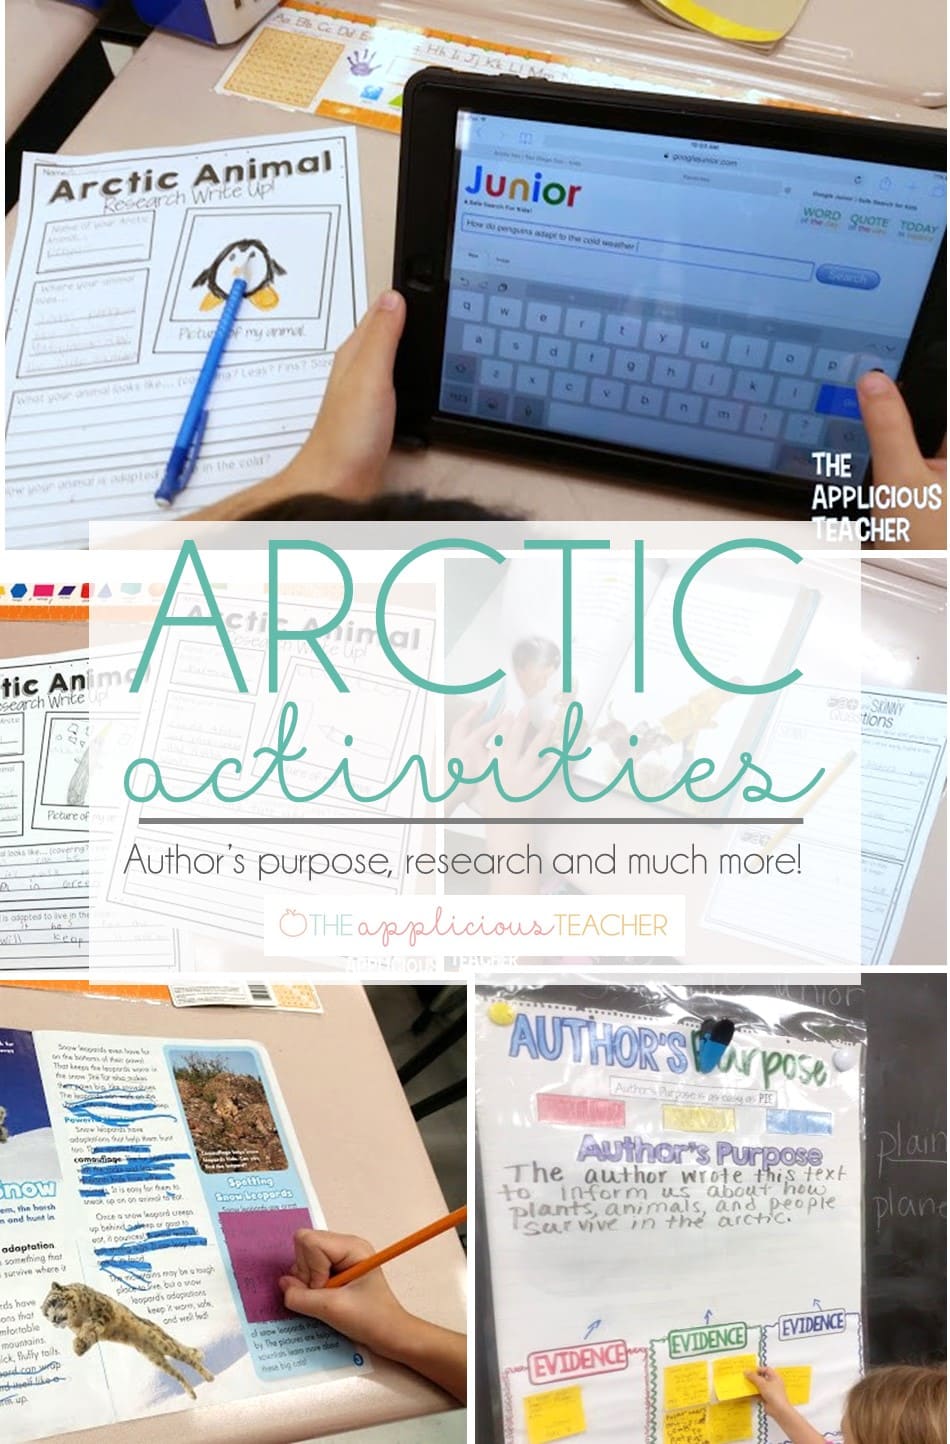 Activity ideas for an arctic study! Love all the engaging ideas in this post! TheAppliciousTeacher.com